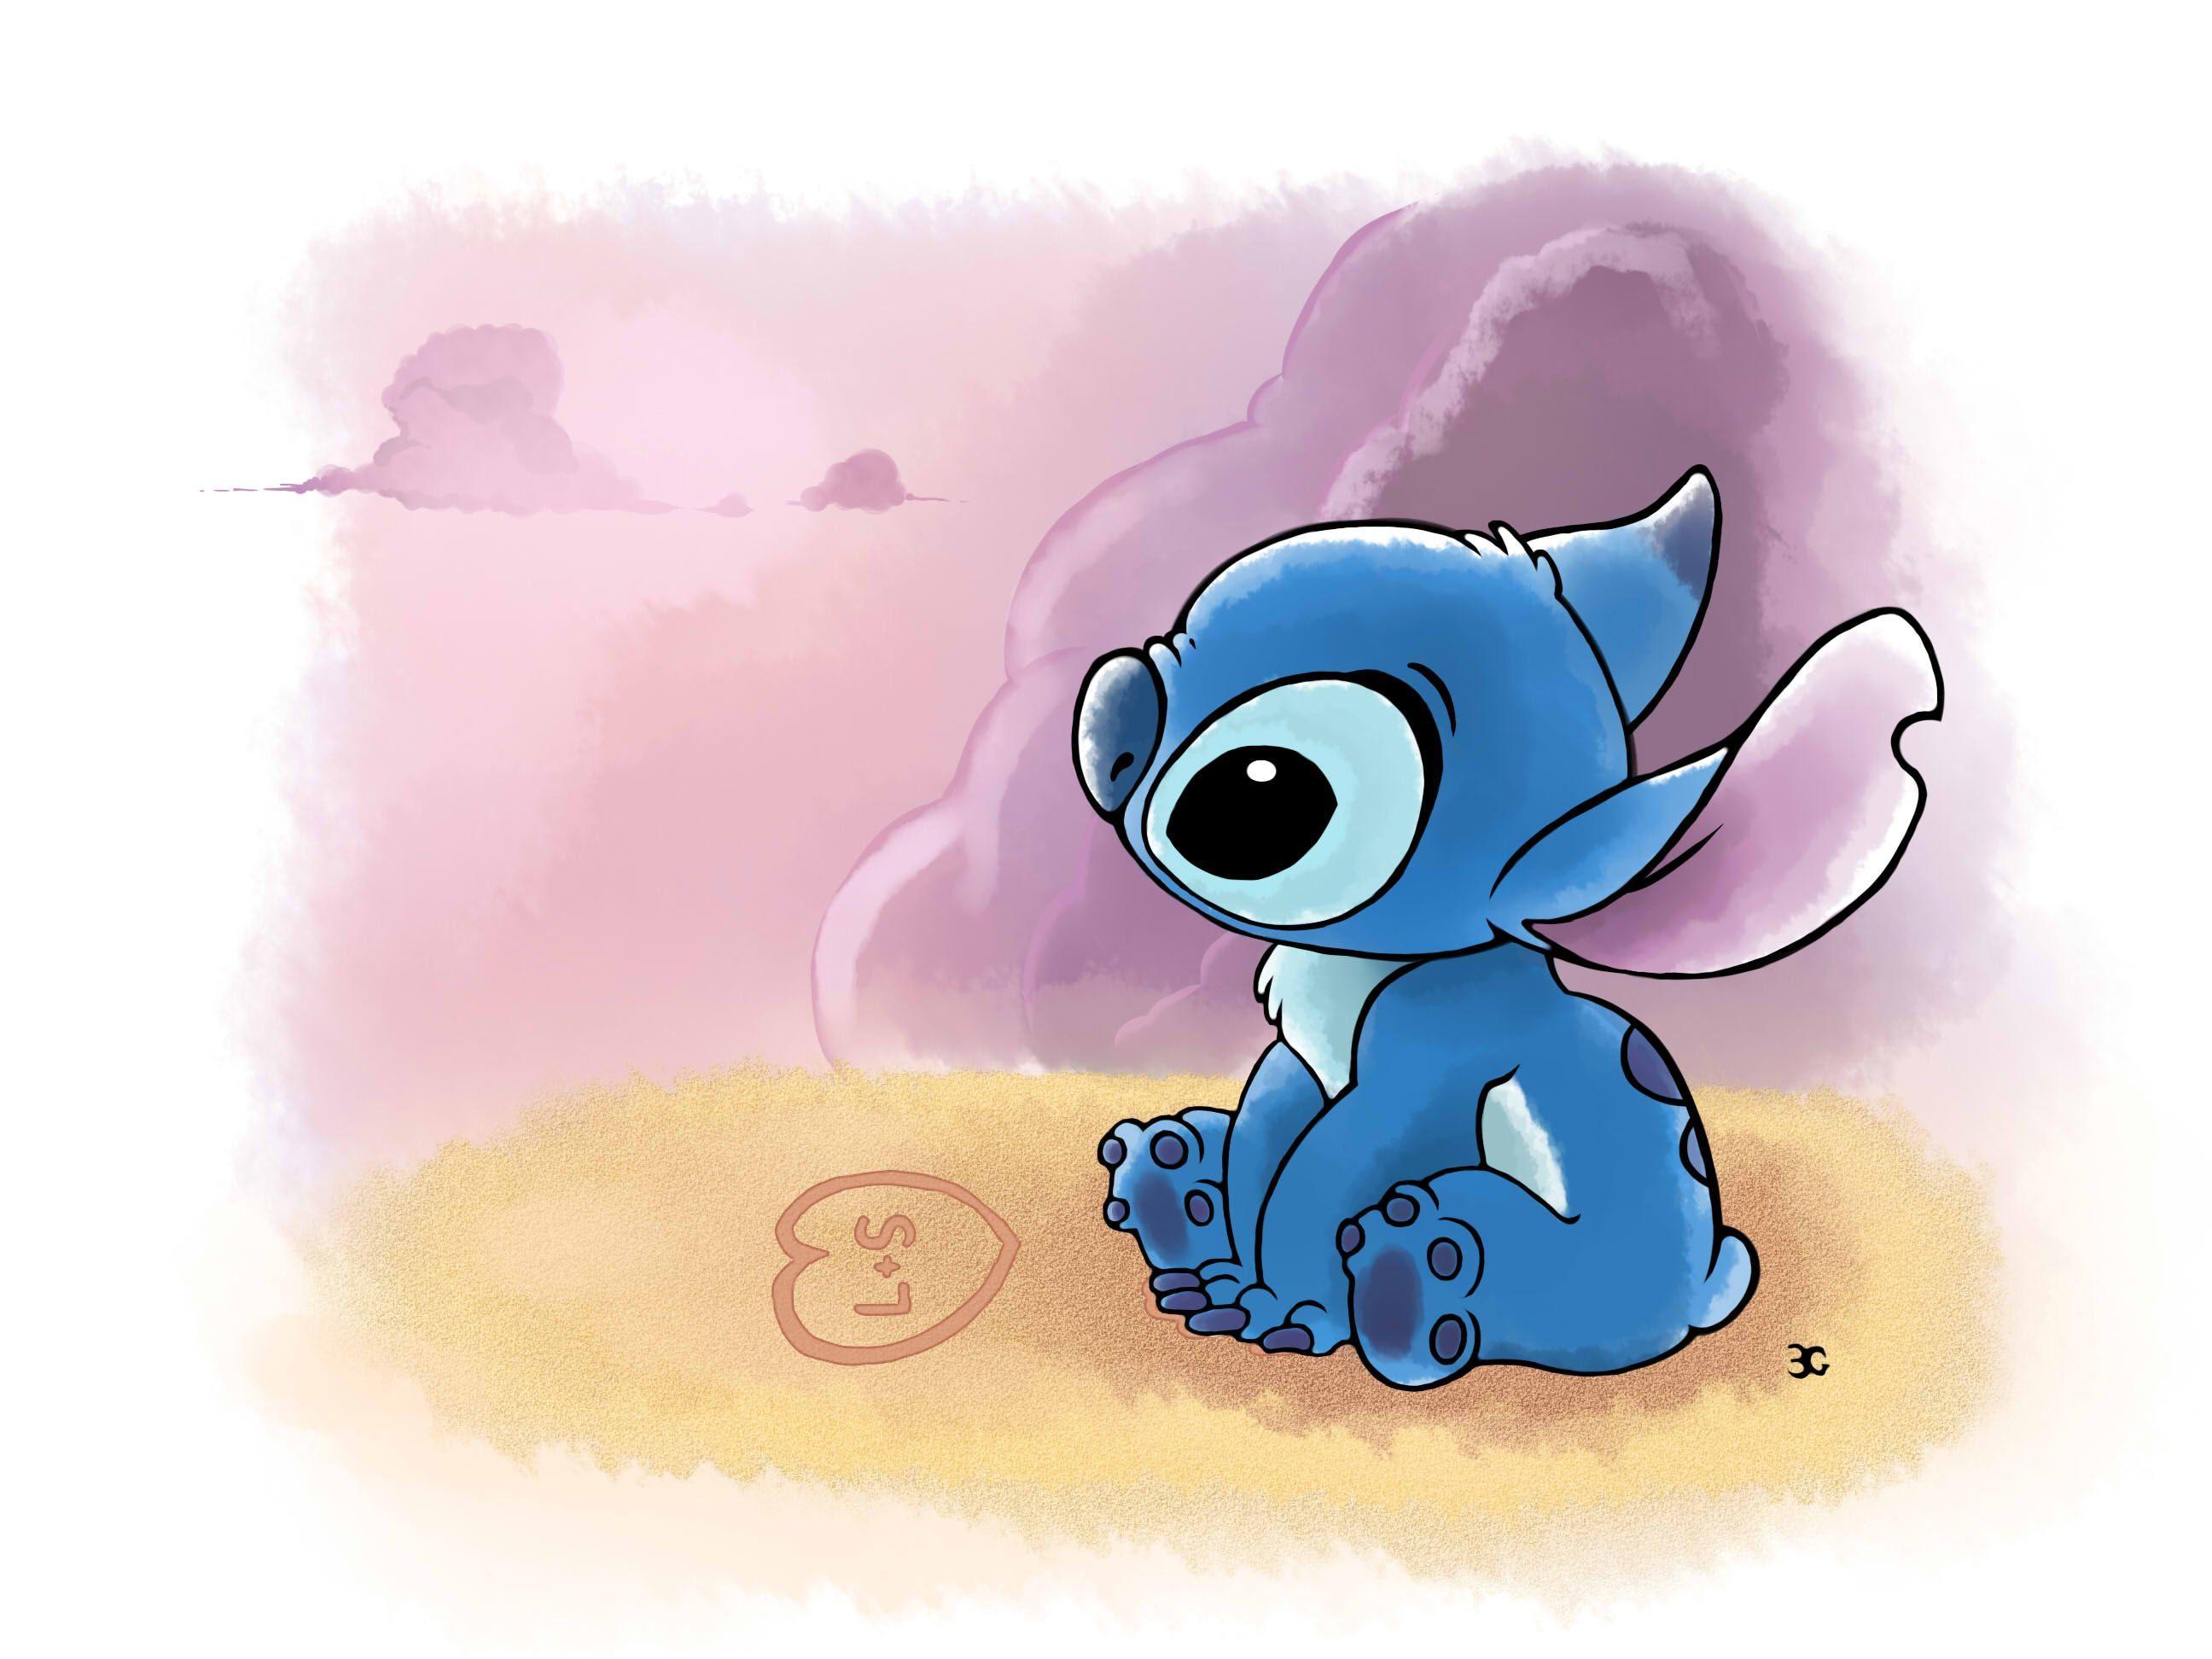 Stitch Laptop Wallpapers Top Free Stitch Laptop Backgrounds Wallpaperaccess Multiple sizes available for all screen sizes. stitch laptop wallpapers top free